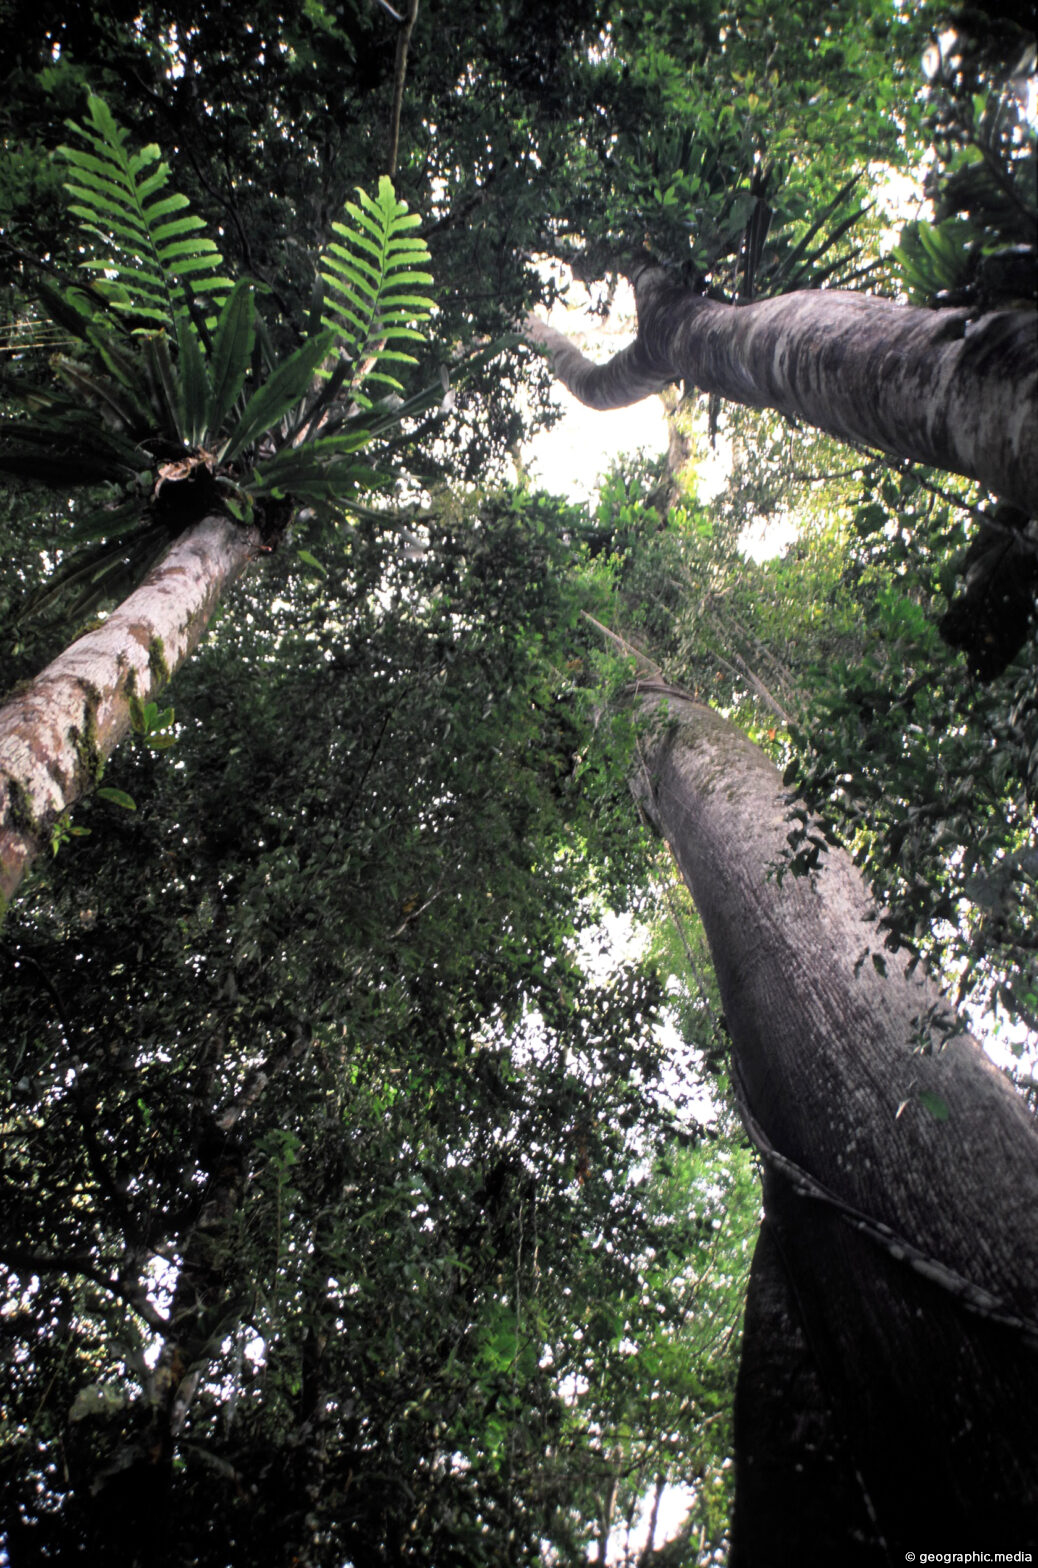 Tall Trees in the Amazon